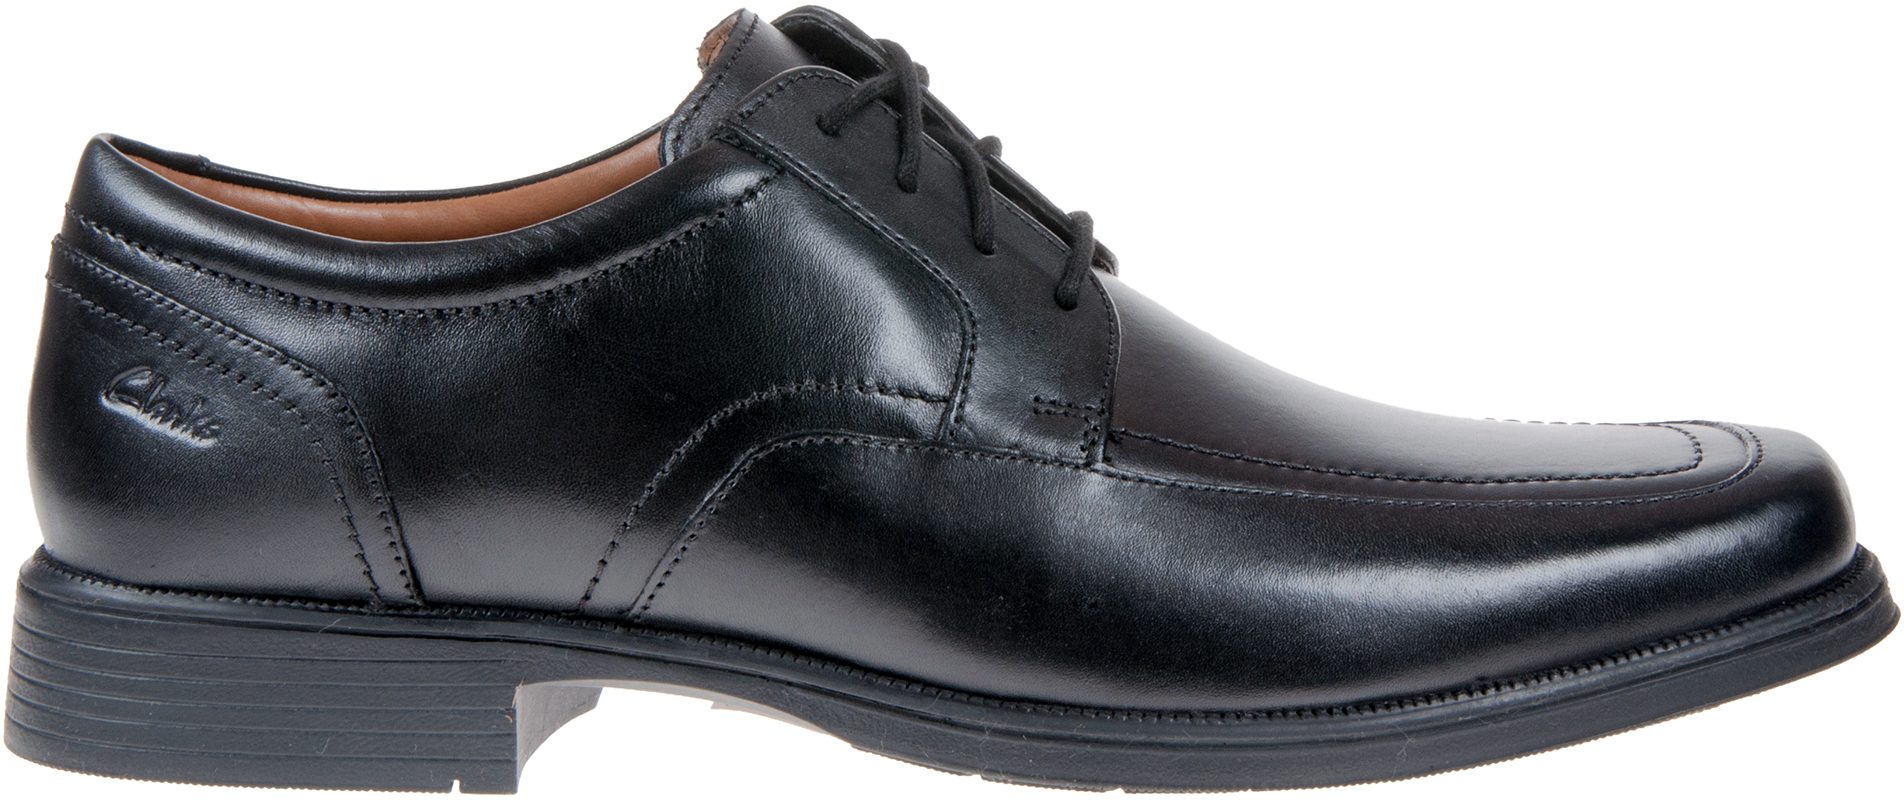 Clarks Huckley Spring Black Leather 26107249 - Formal Shoes - Humphries ...